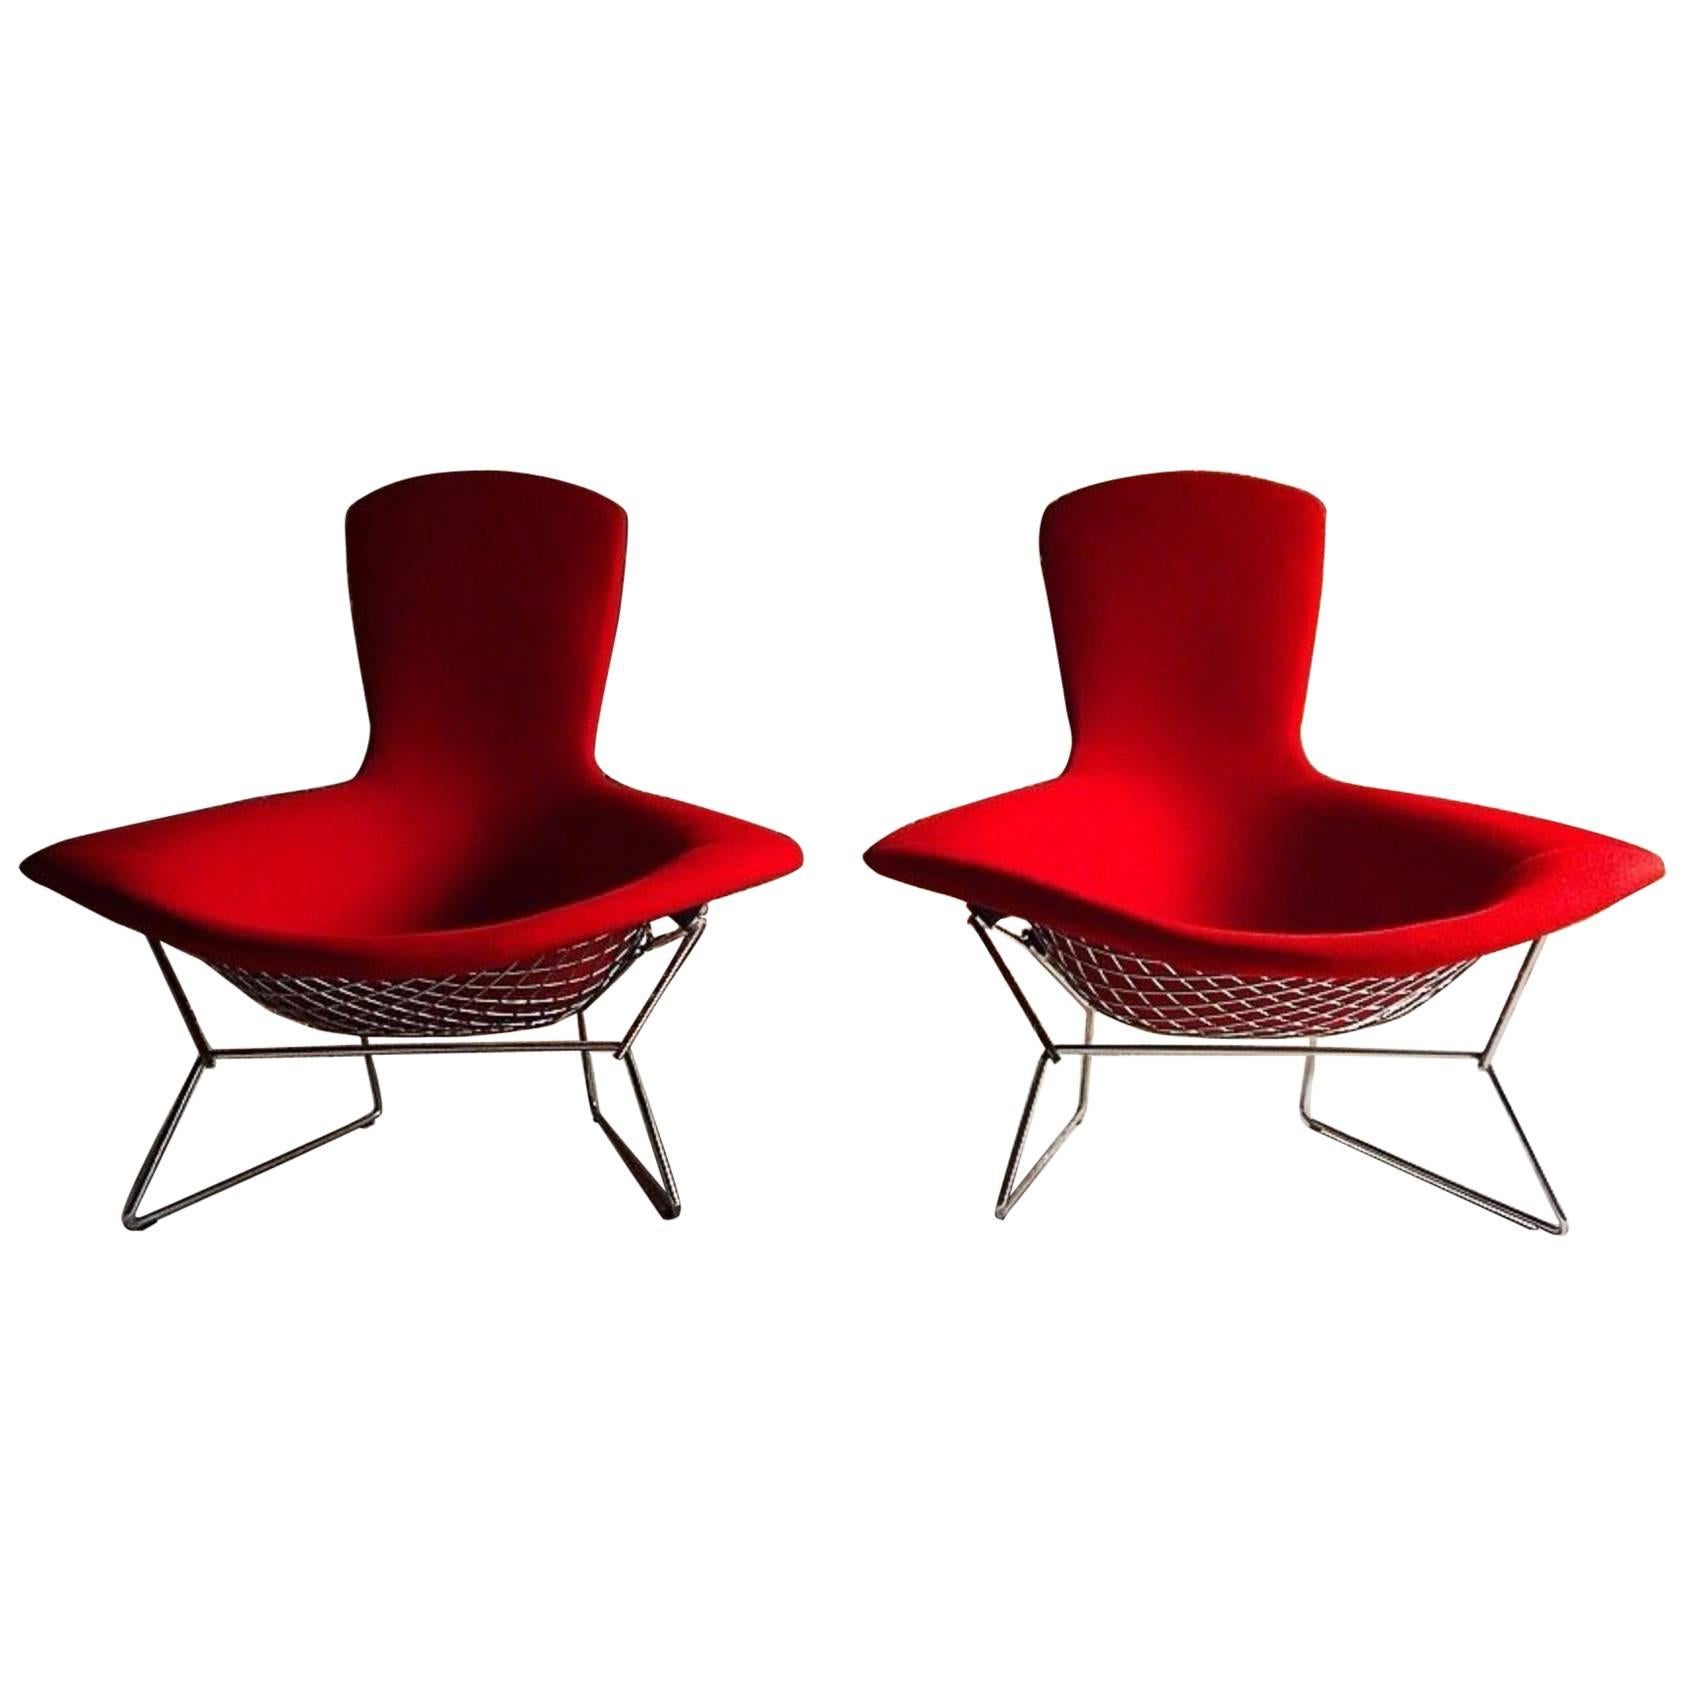 Pair of Harry Bertoia Bird Chairs in Red for Knoll International